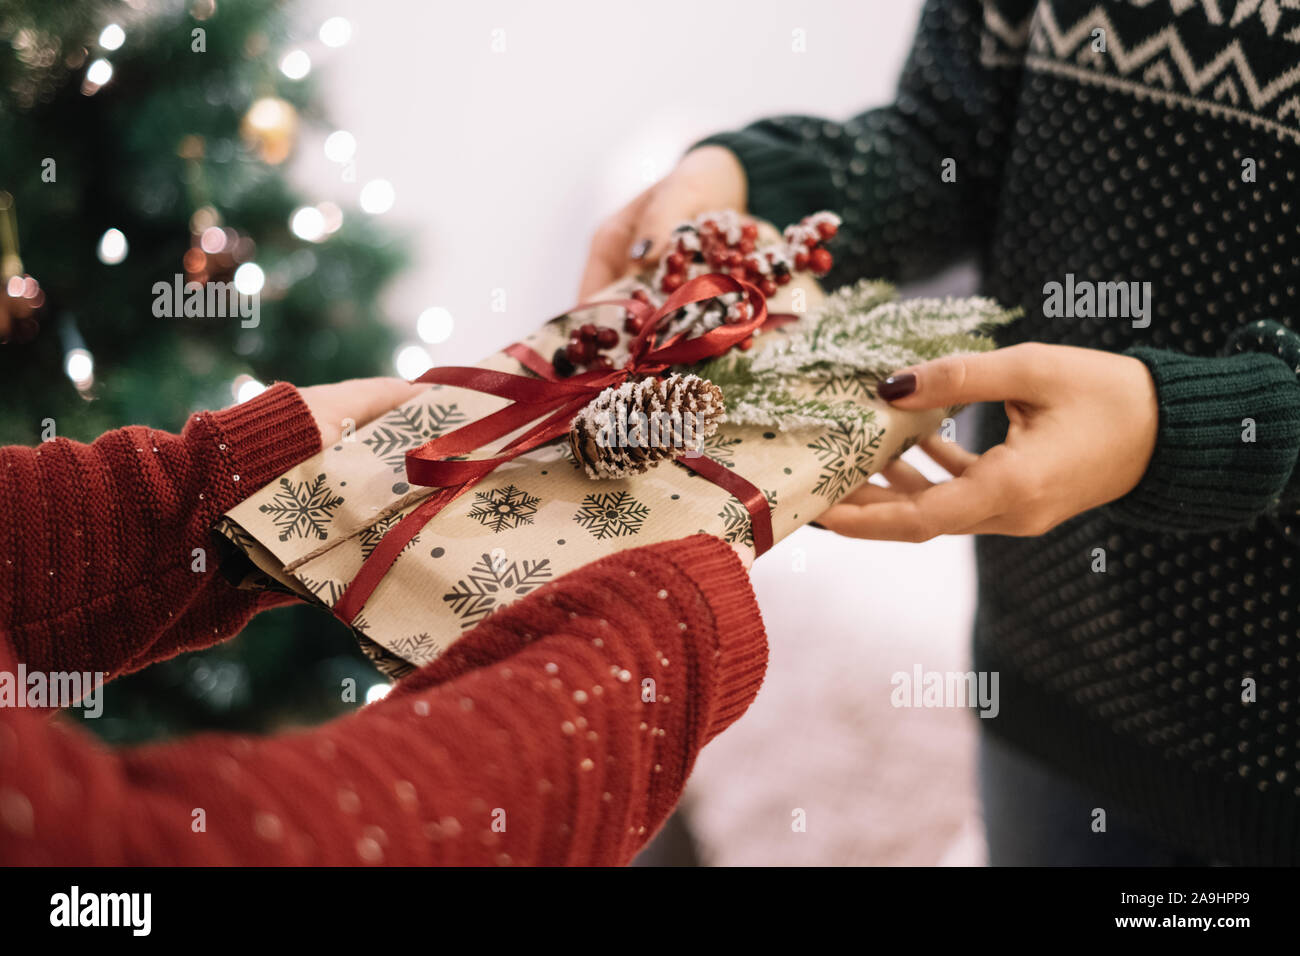 Premium Photo  Closeup on mature hands exchanging a christmas